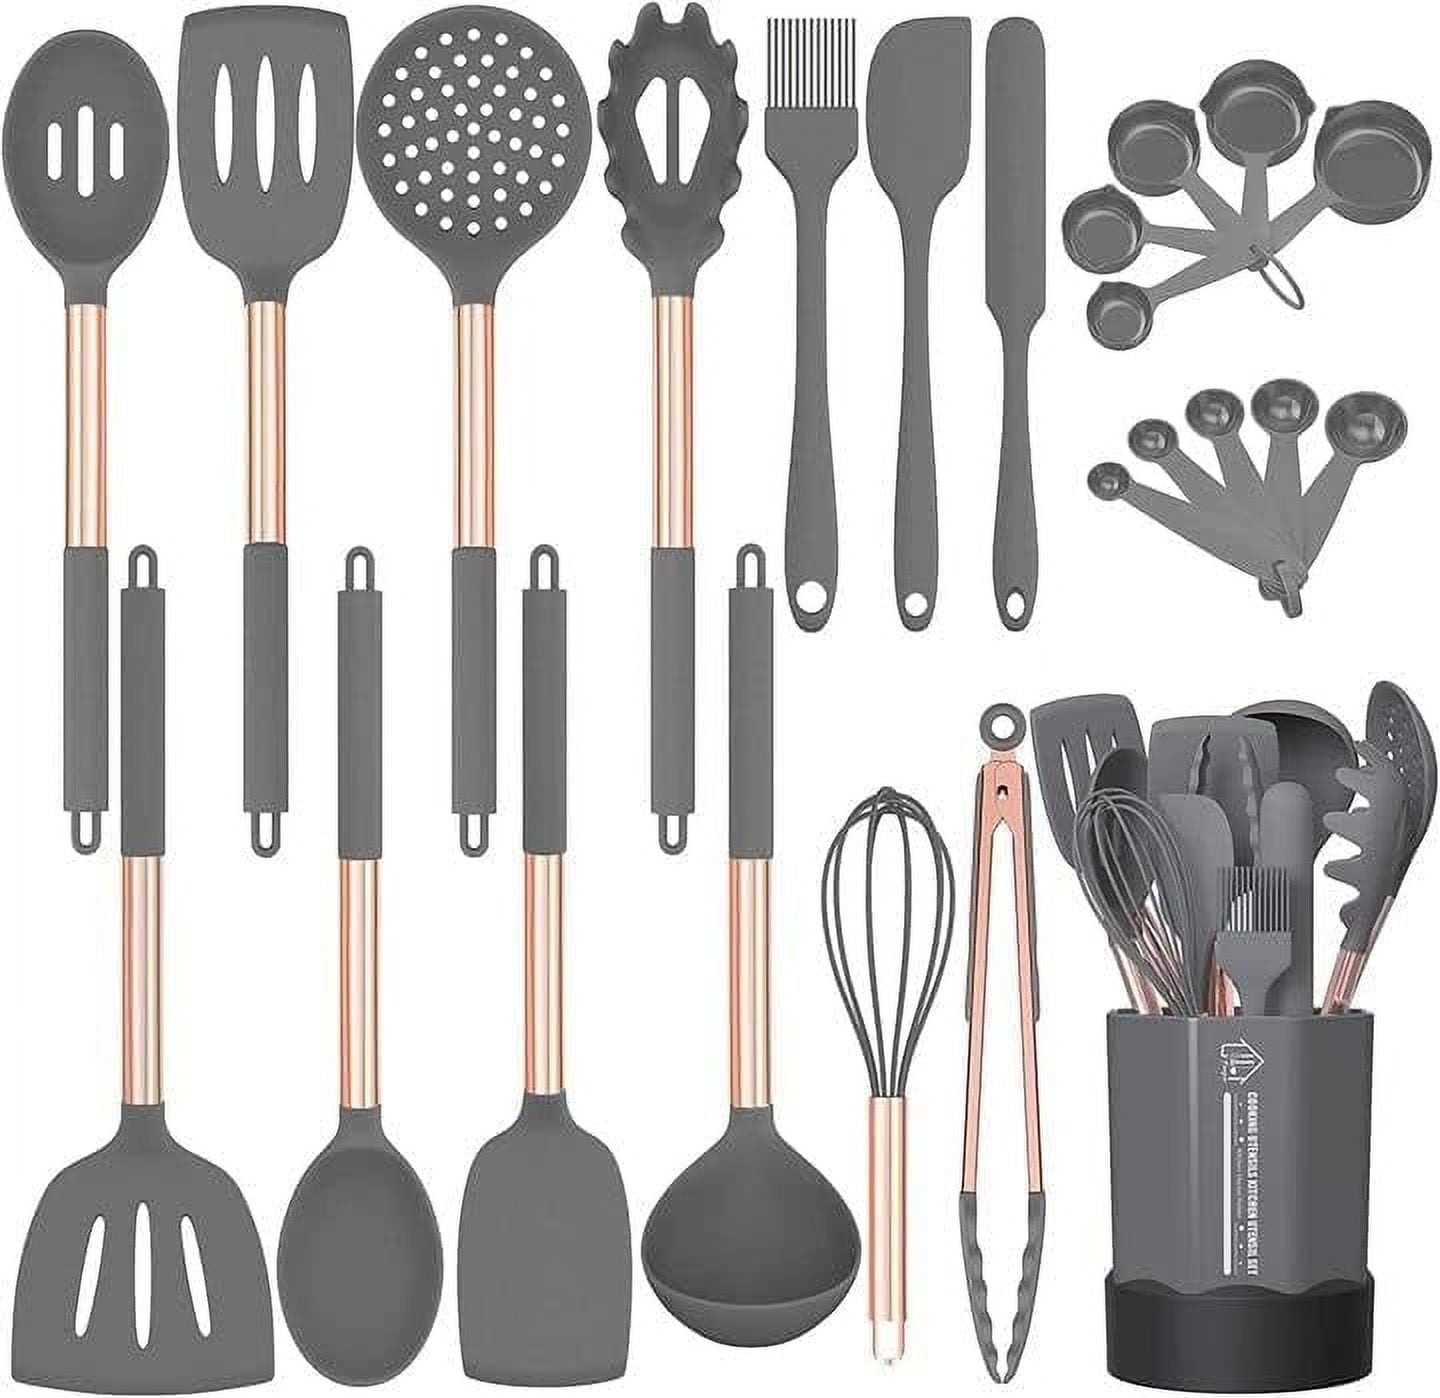 Kitchen Utensil Set-Silicone Cooking Utensils-33 Kitchen Gadgets & Spoons  for Nonstick Cookware-Sili…See more Kitchen Utensil Set-Silicone Cooking